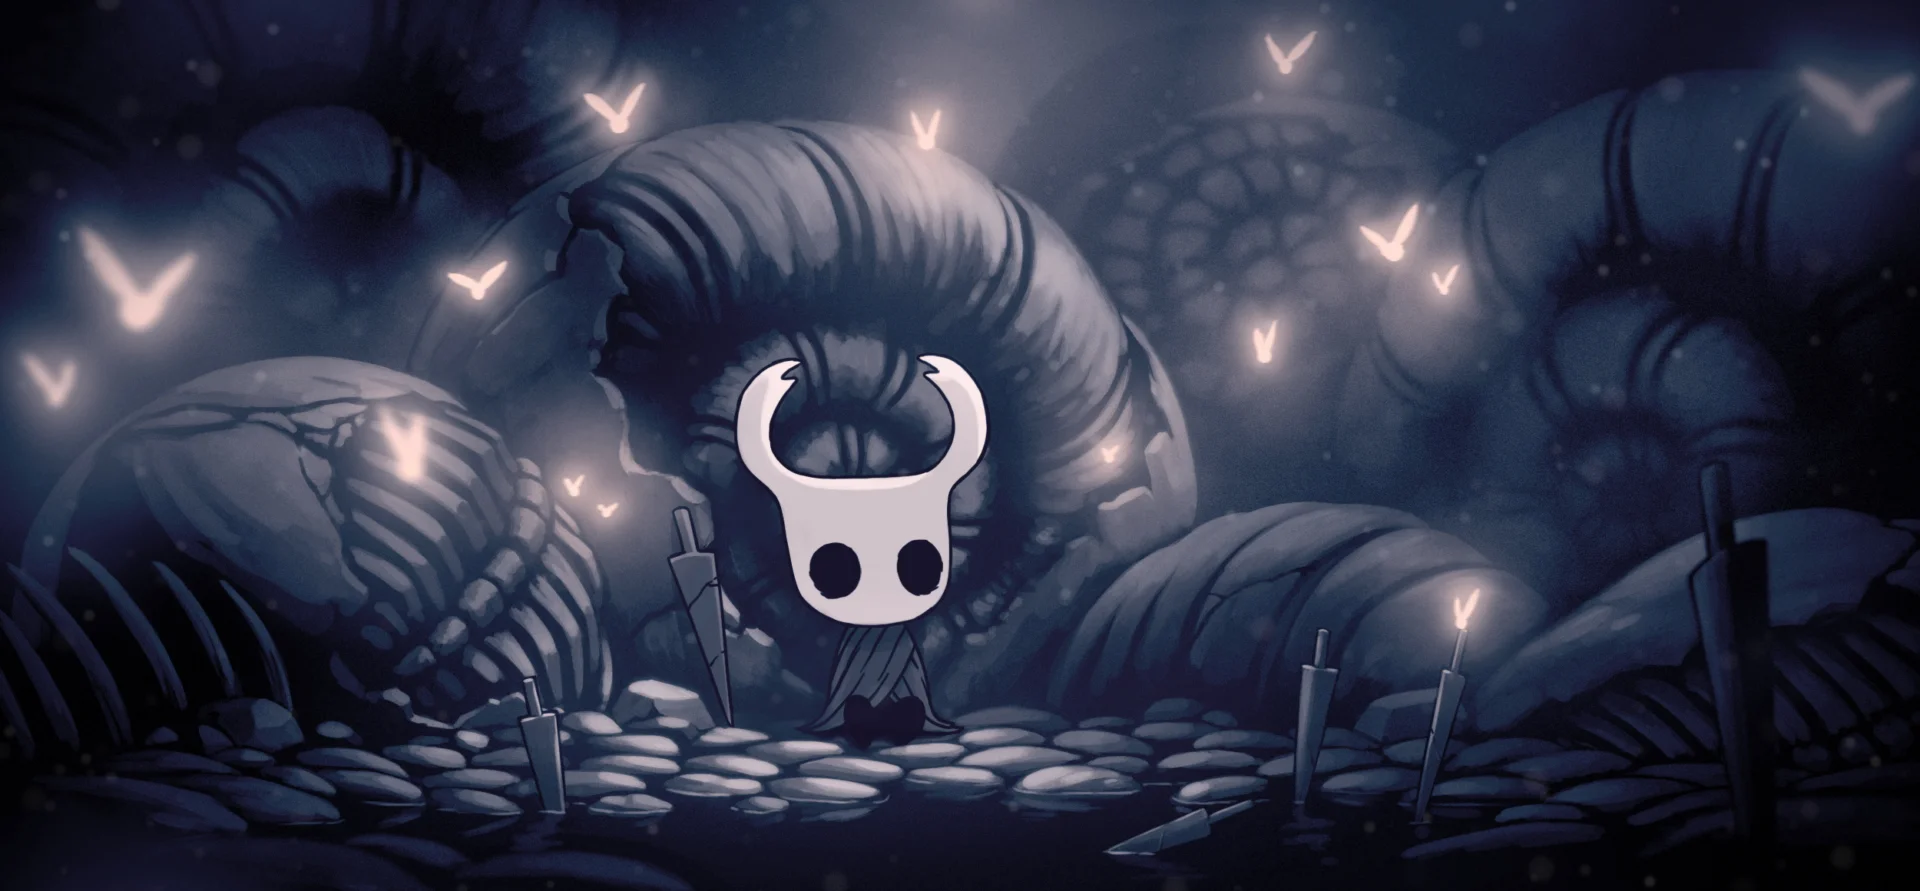 Hollow Knight | No cost too great